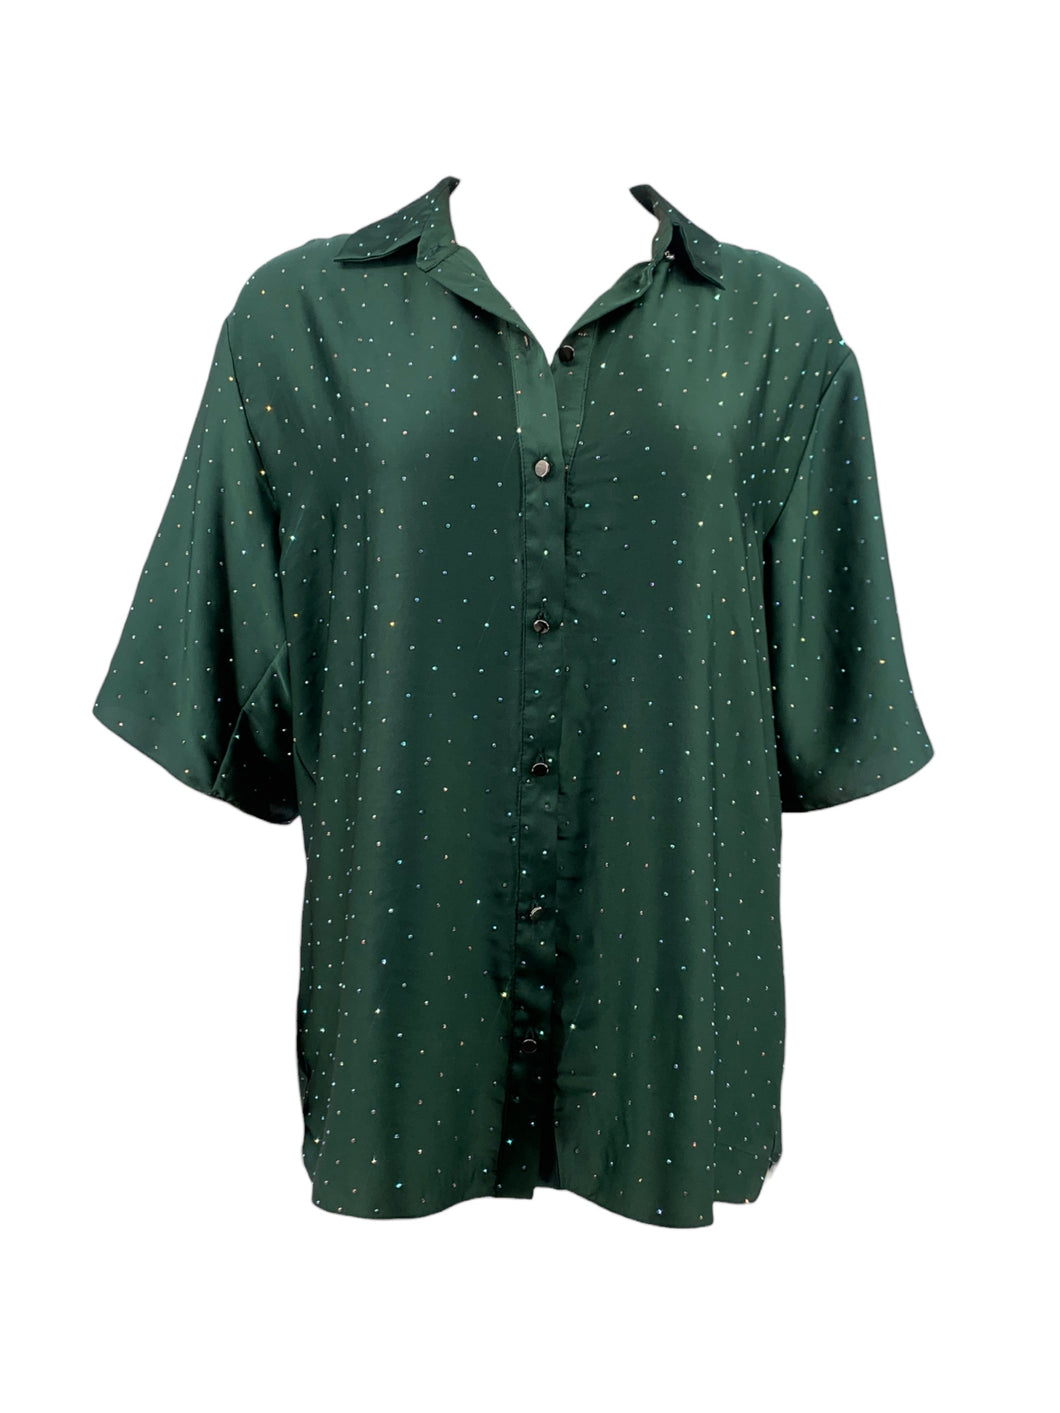 Forrest Satin Shirt with Crystals - Limited Edition